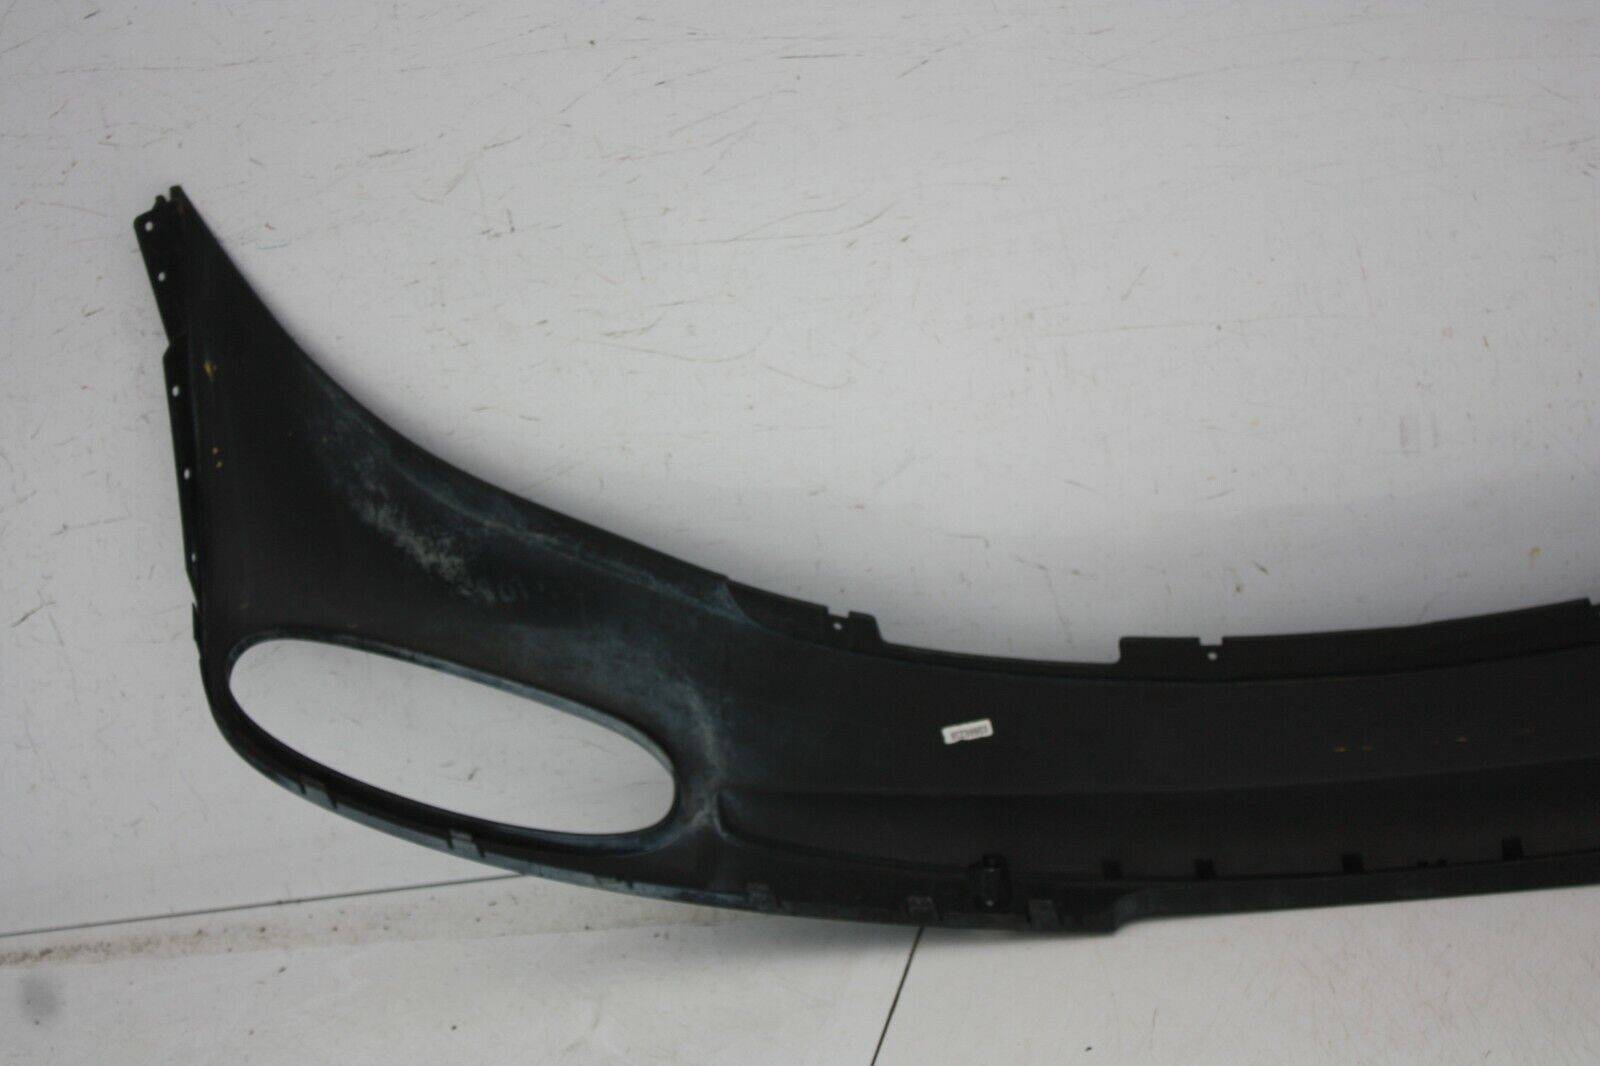 Bentley-Continental-GT-GTC-Rear-Bumper-Lower-Section-Genuine-2011-to-2014-175367537581-8